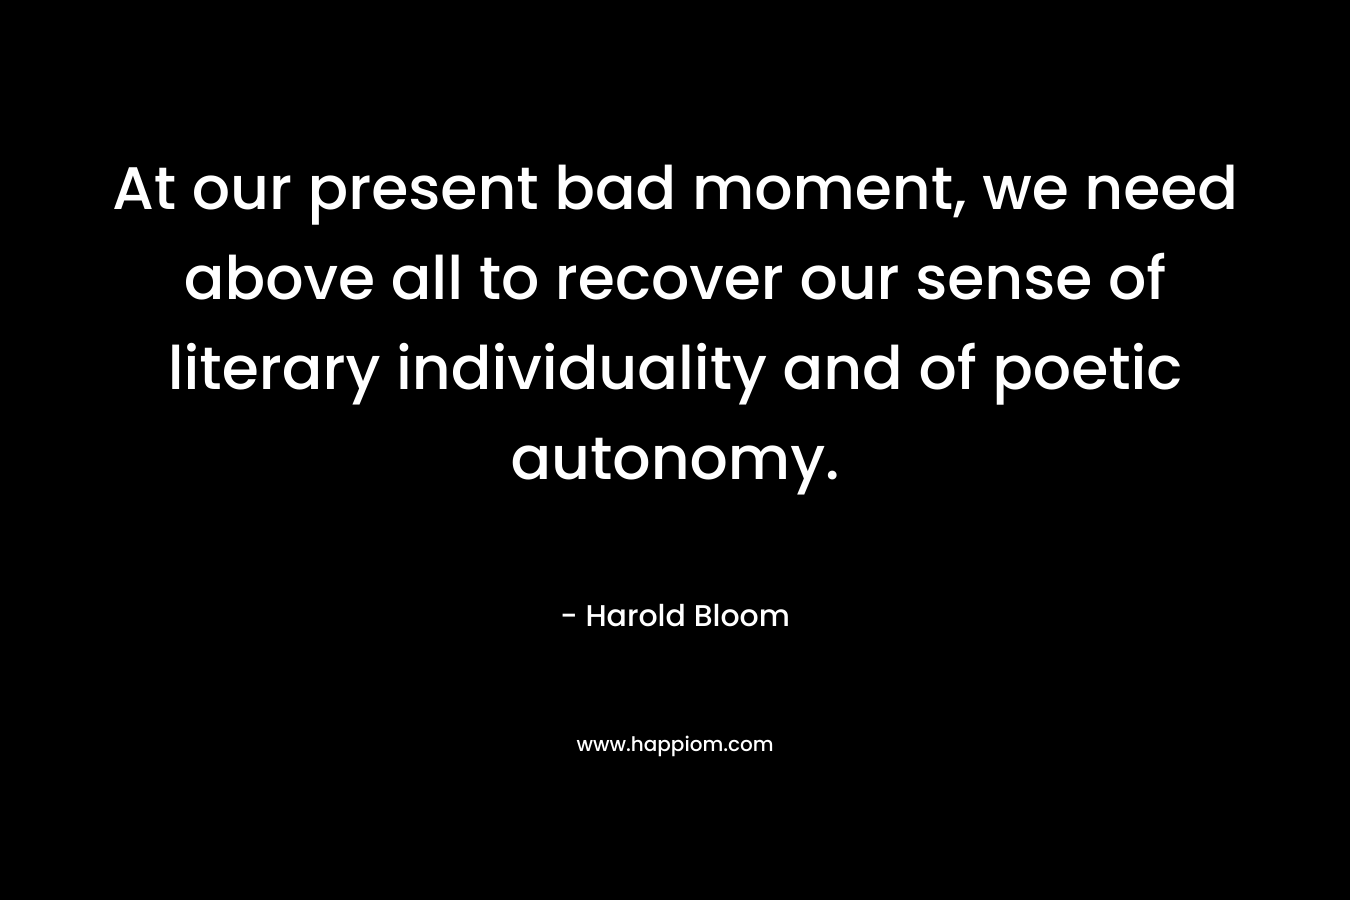 At our present bad moment, we need above all to recover our sense of literary individuality and of poetic autonomy.